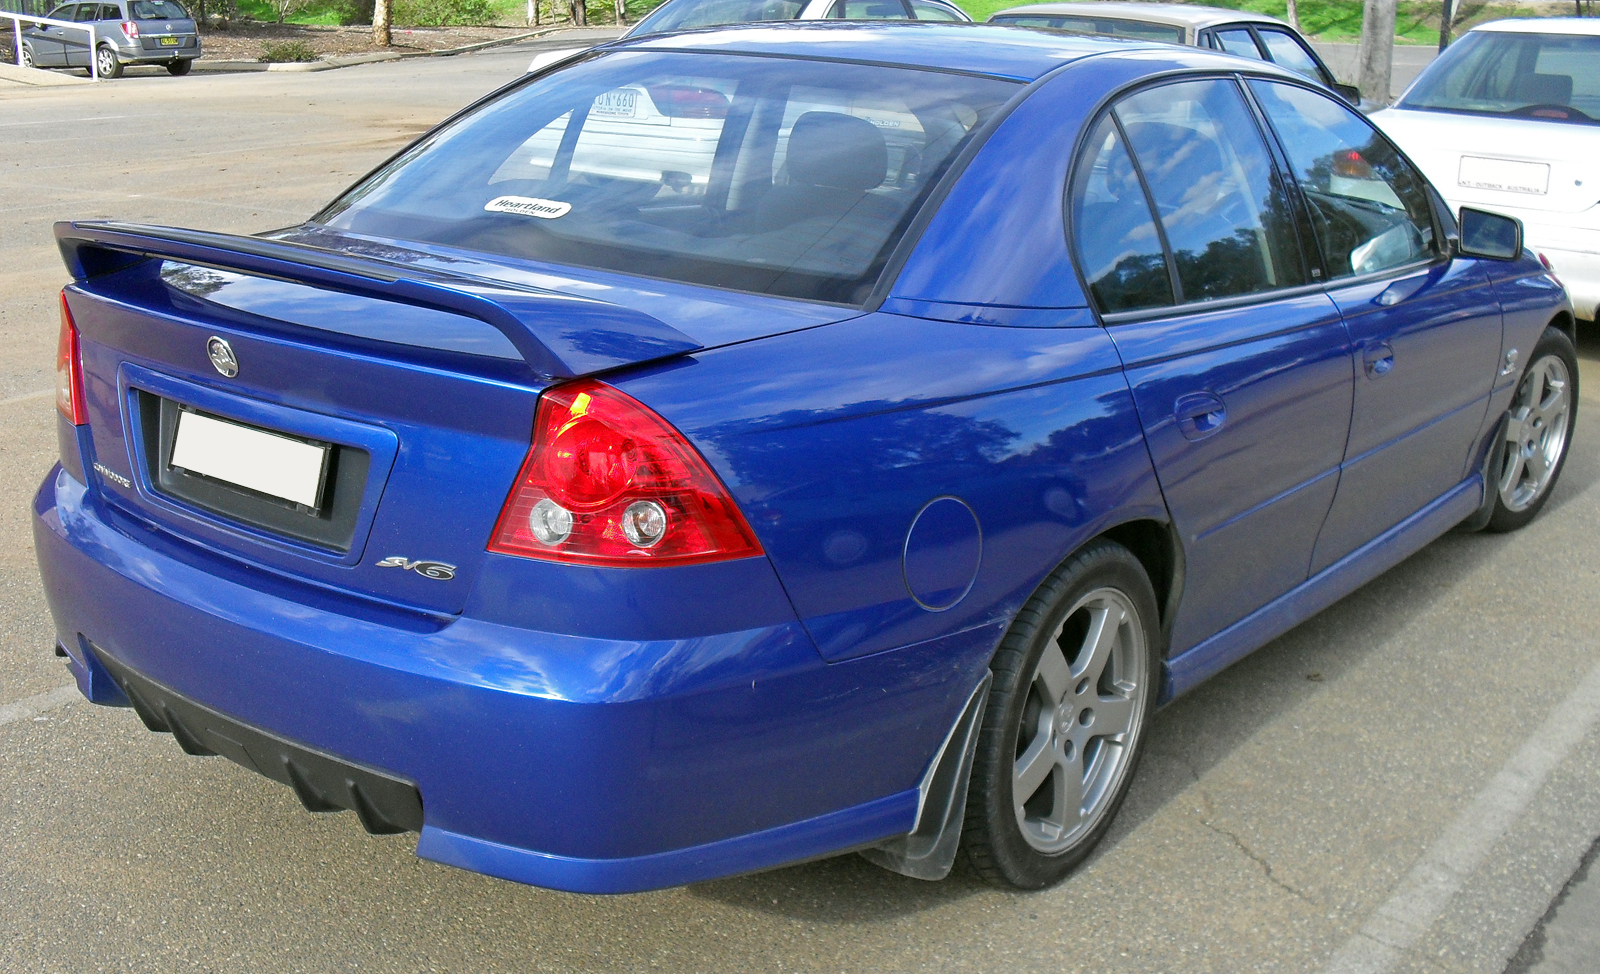 2004 holden vz commodore sv6. Holden VZ Commodore SV6. More images